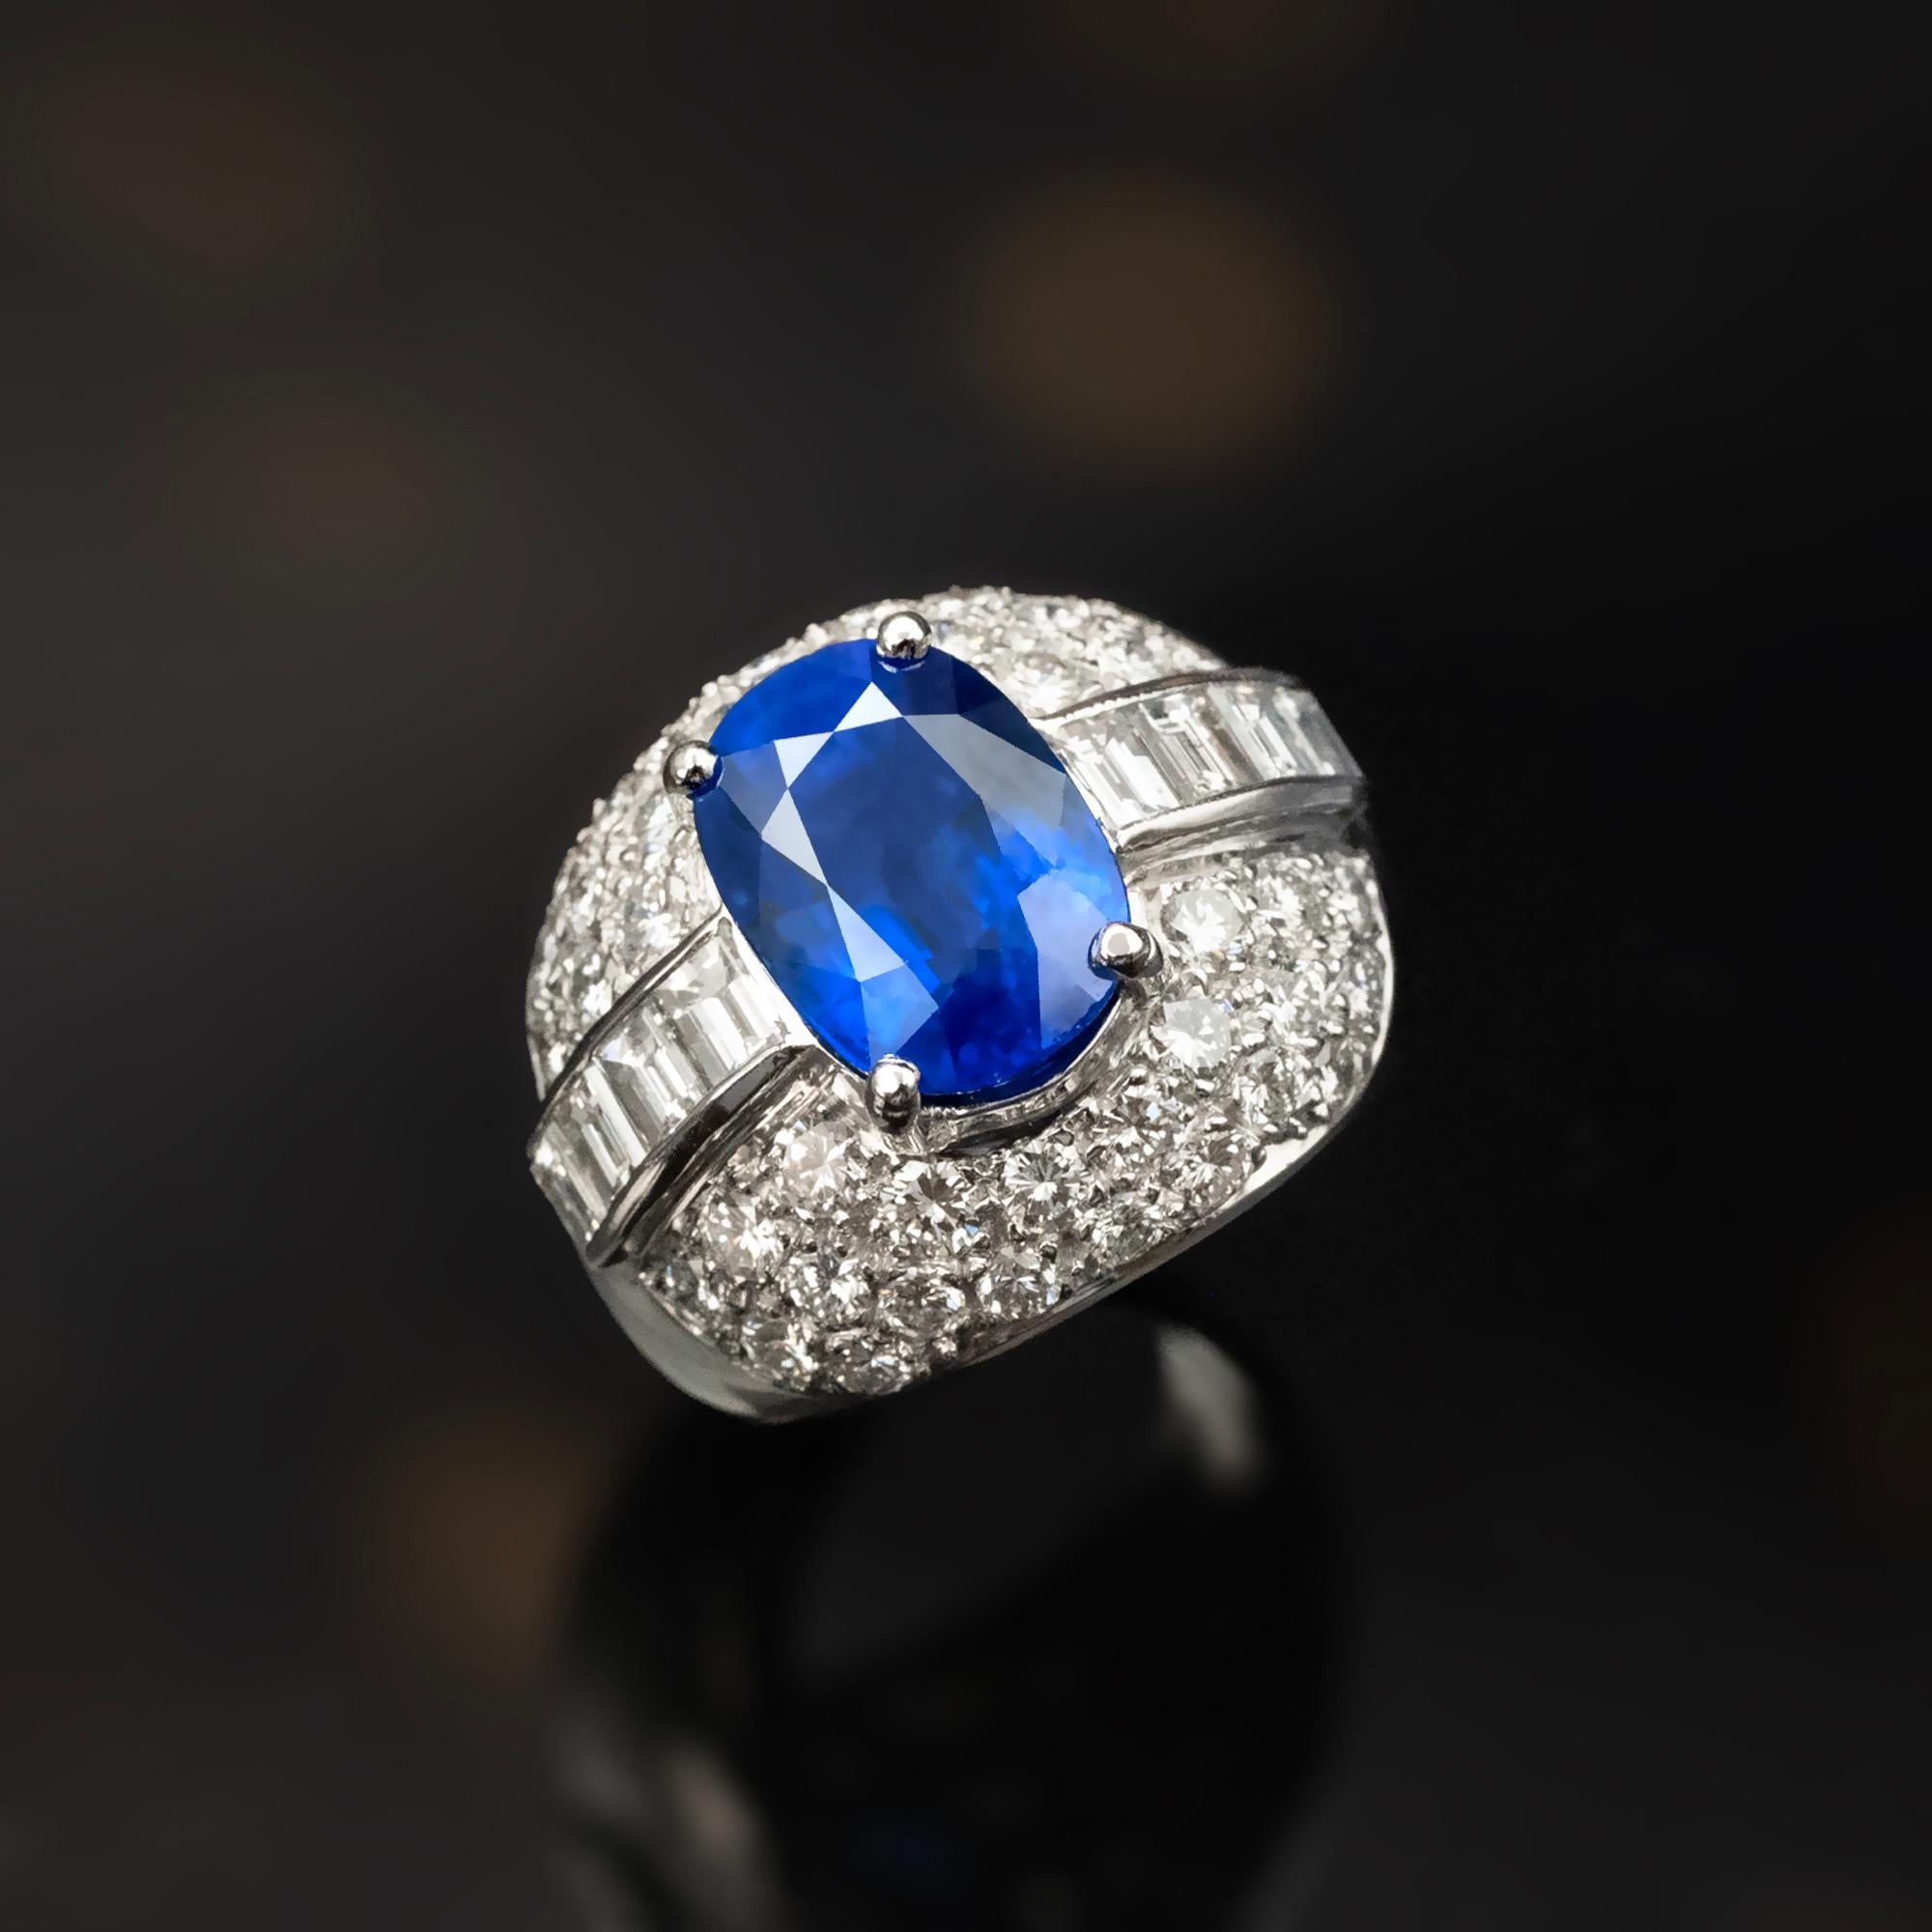 This exquisite dome ring features a magnificent central sapphire, weighing 6.85 carats boasting a Vivid and highly sought-after Royal Blue hue, as certified.  
The sapphire is complemented by a line of baguette-cut diamonds on each side and